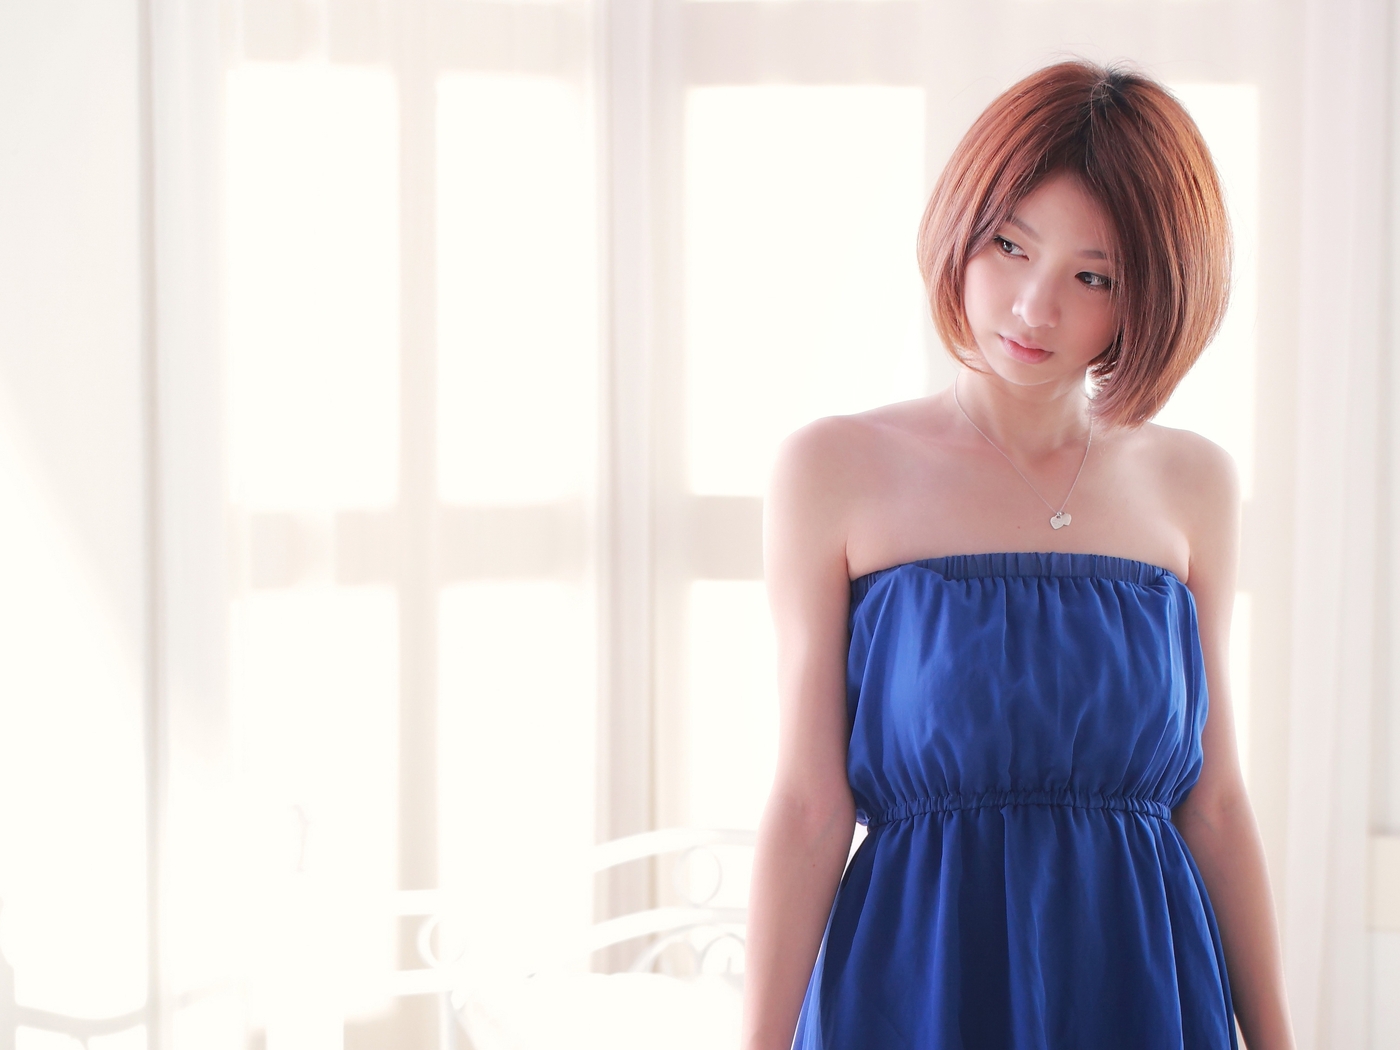 Image: Girl, asian, hairstyle, rack, stand, blue, dress, window